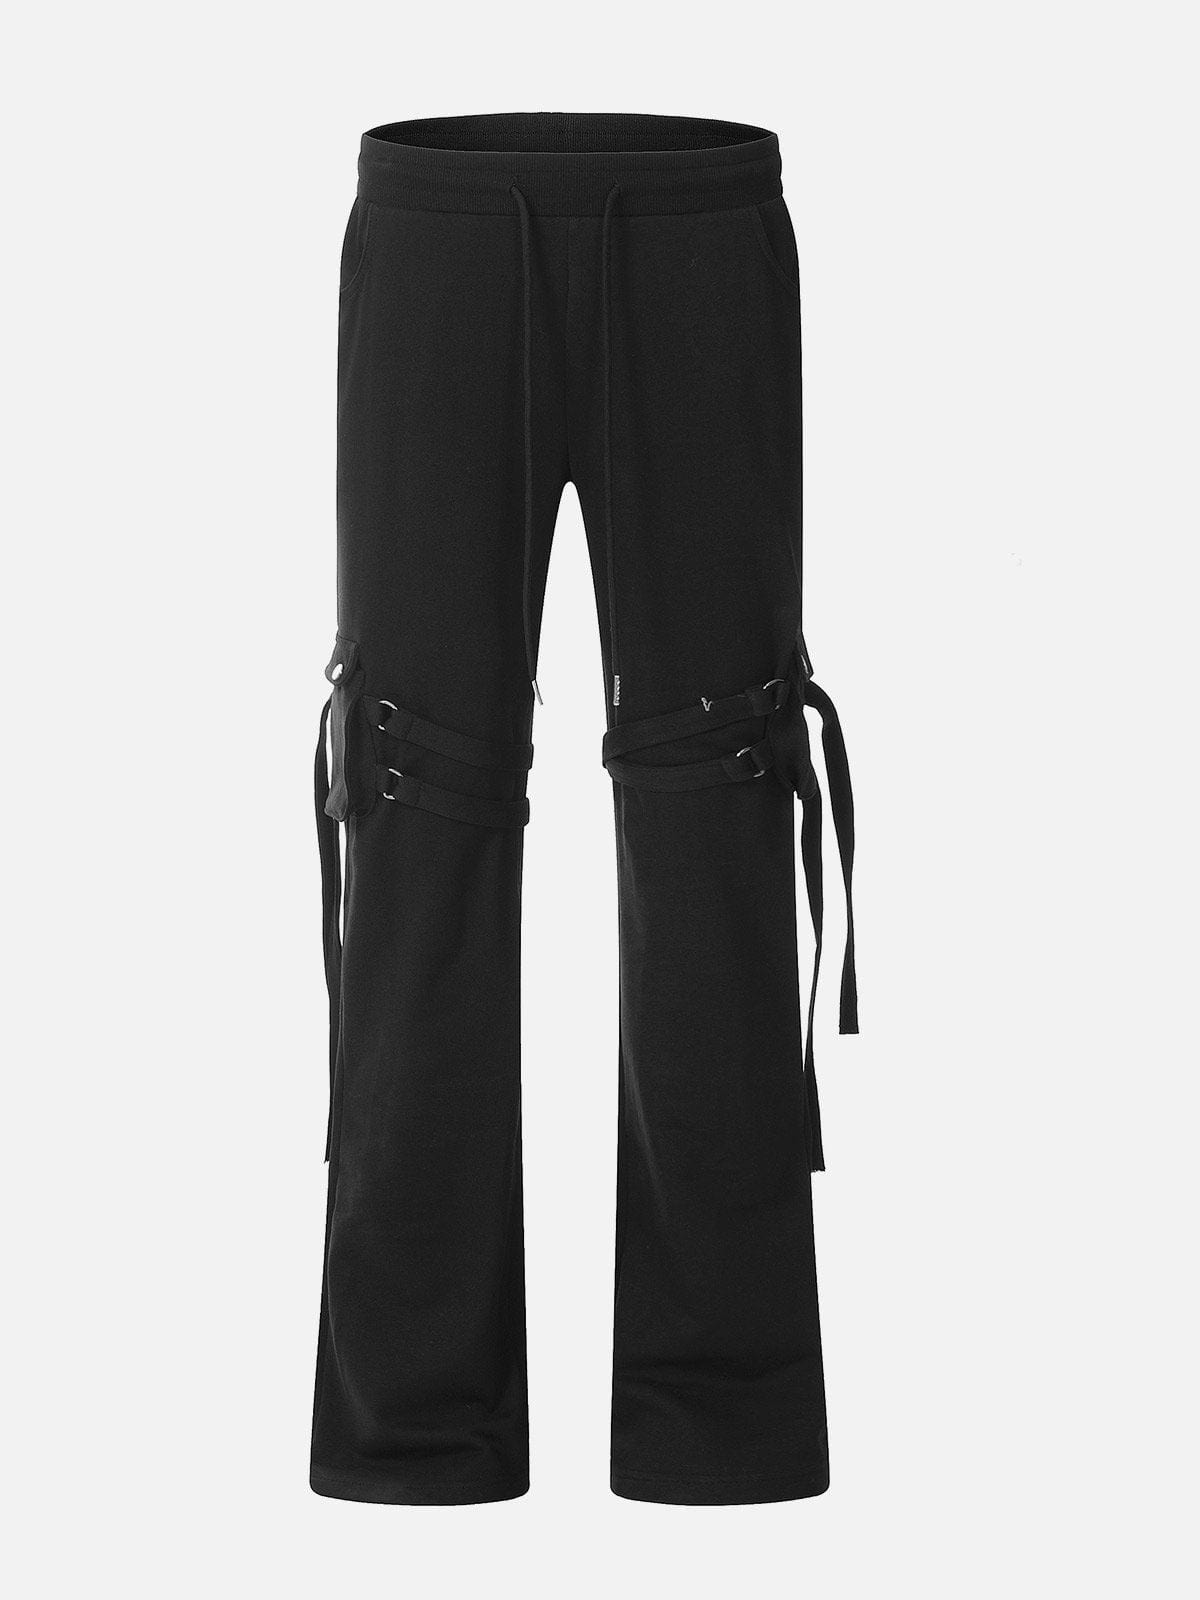 NEV Functional Style Tied Pants